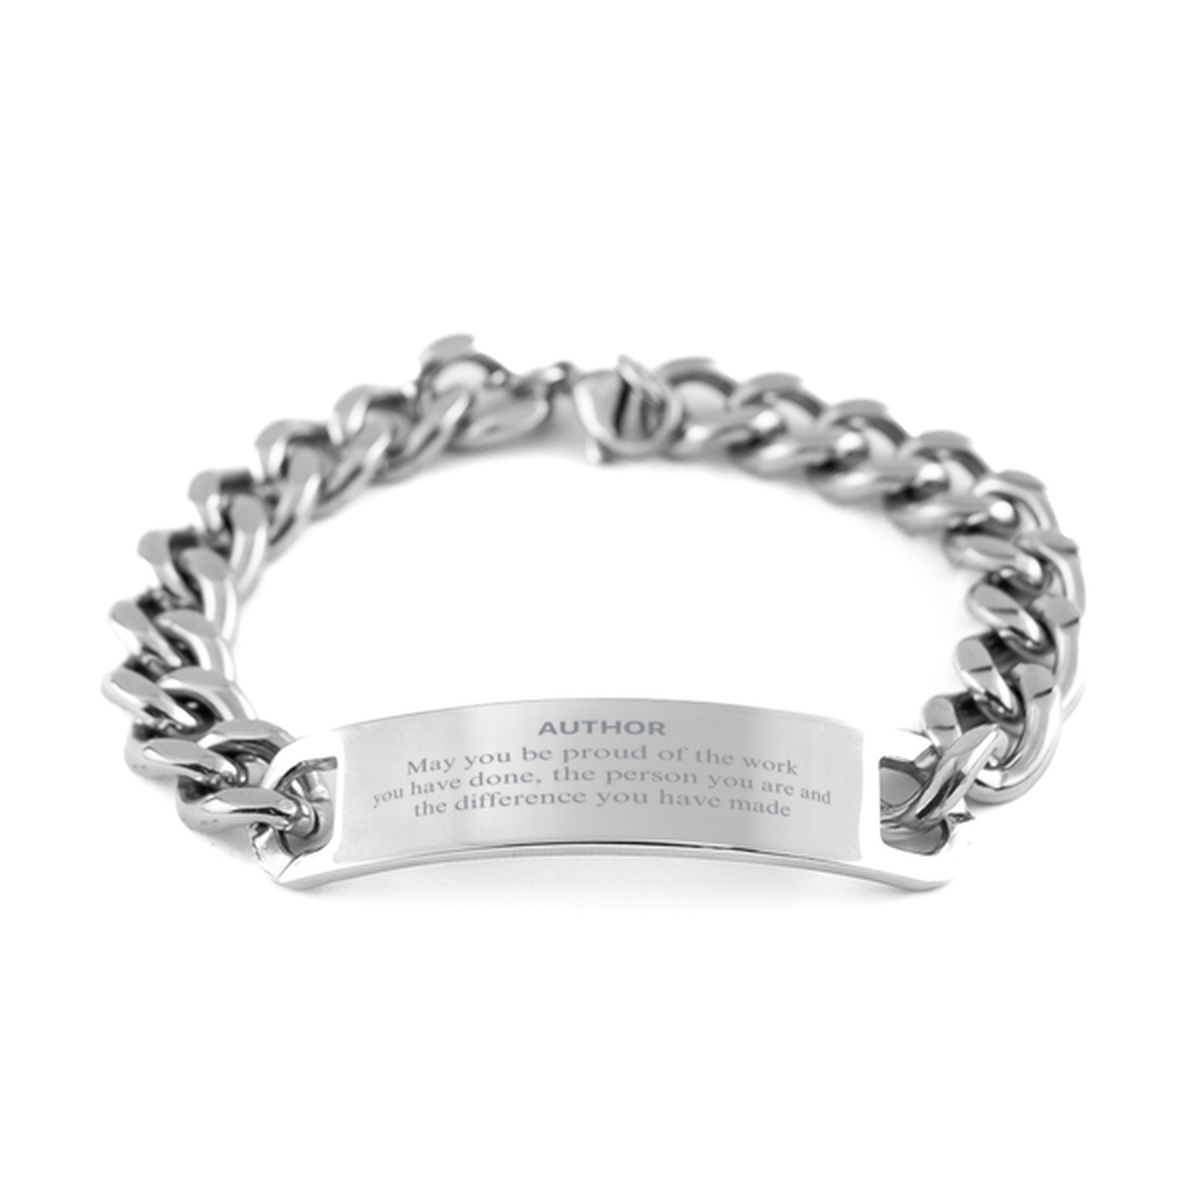 Author May you be proud of the work you have done, Retirement Author Cuban Chain Stainless Steel Bracelet for Colleague Appreciation Gifts Amazing for Author